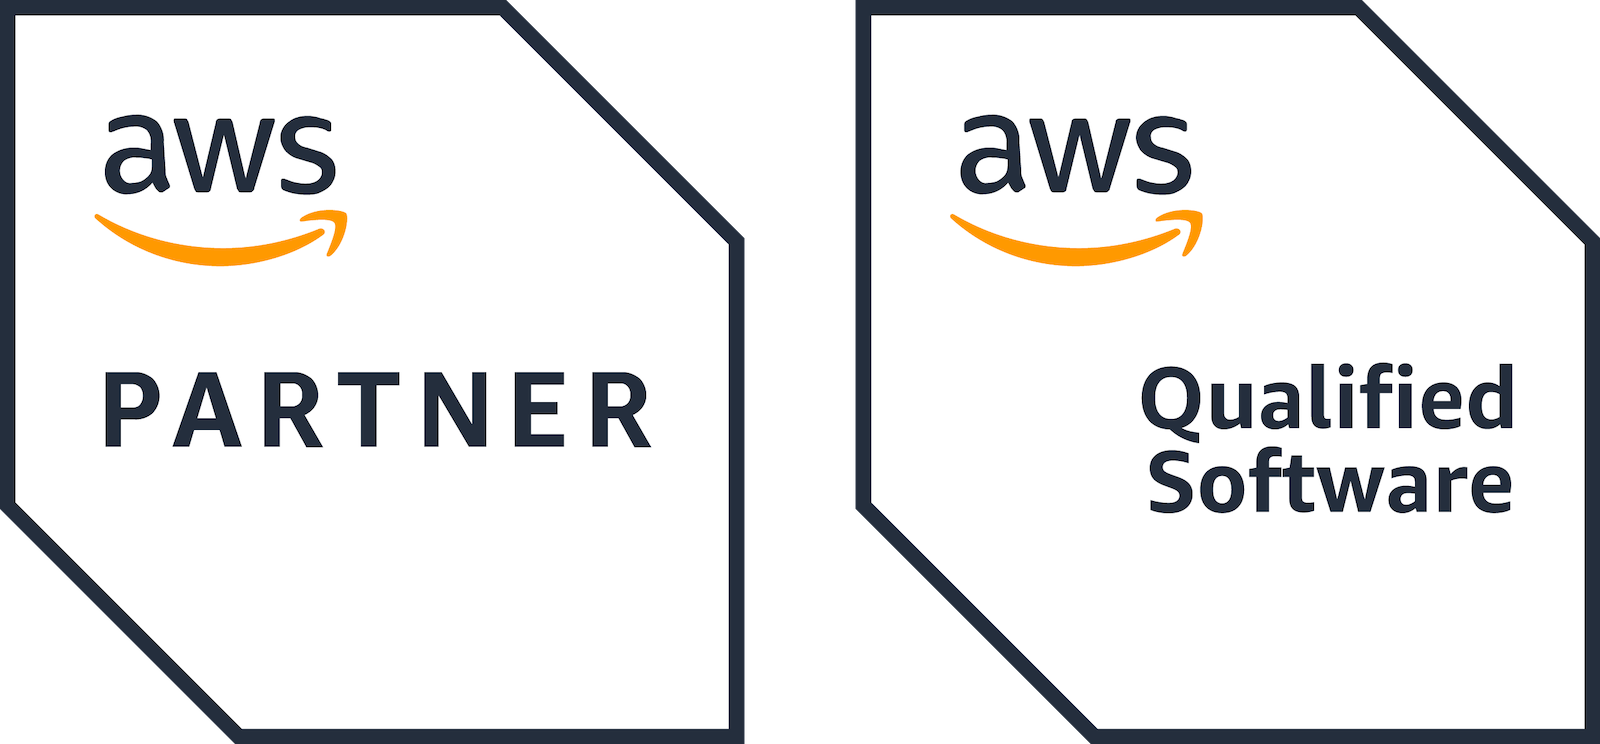 logos showing Partner and Qualified Software status for AWS